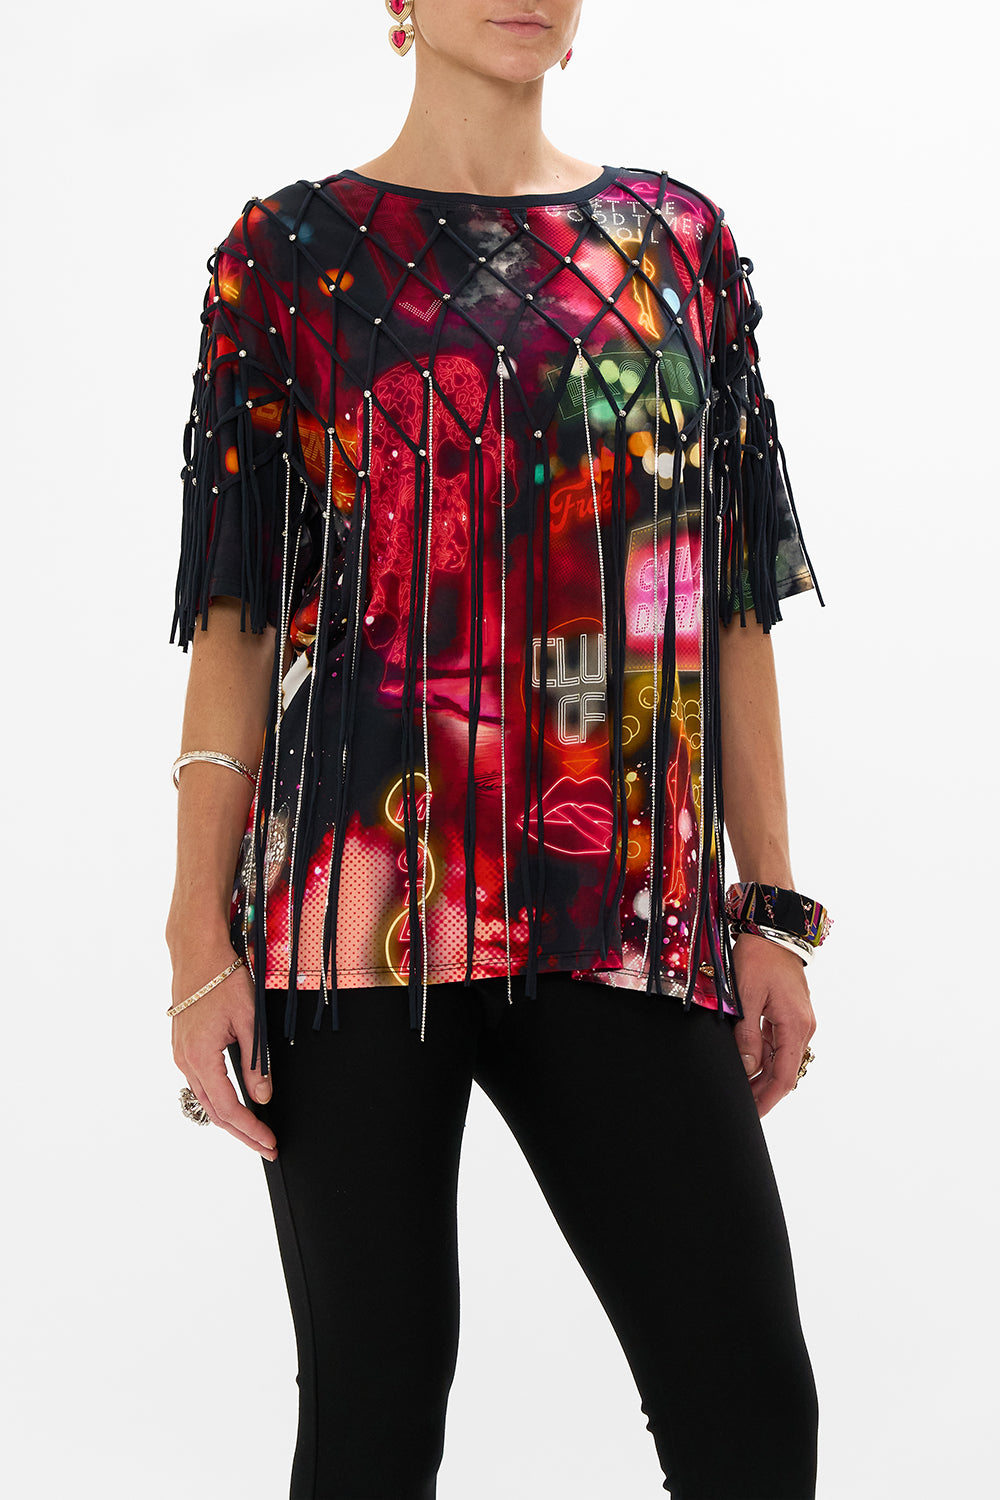 CAMILLA black oversized band tee with embellished overlay in Electric Loveland print.